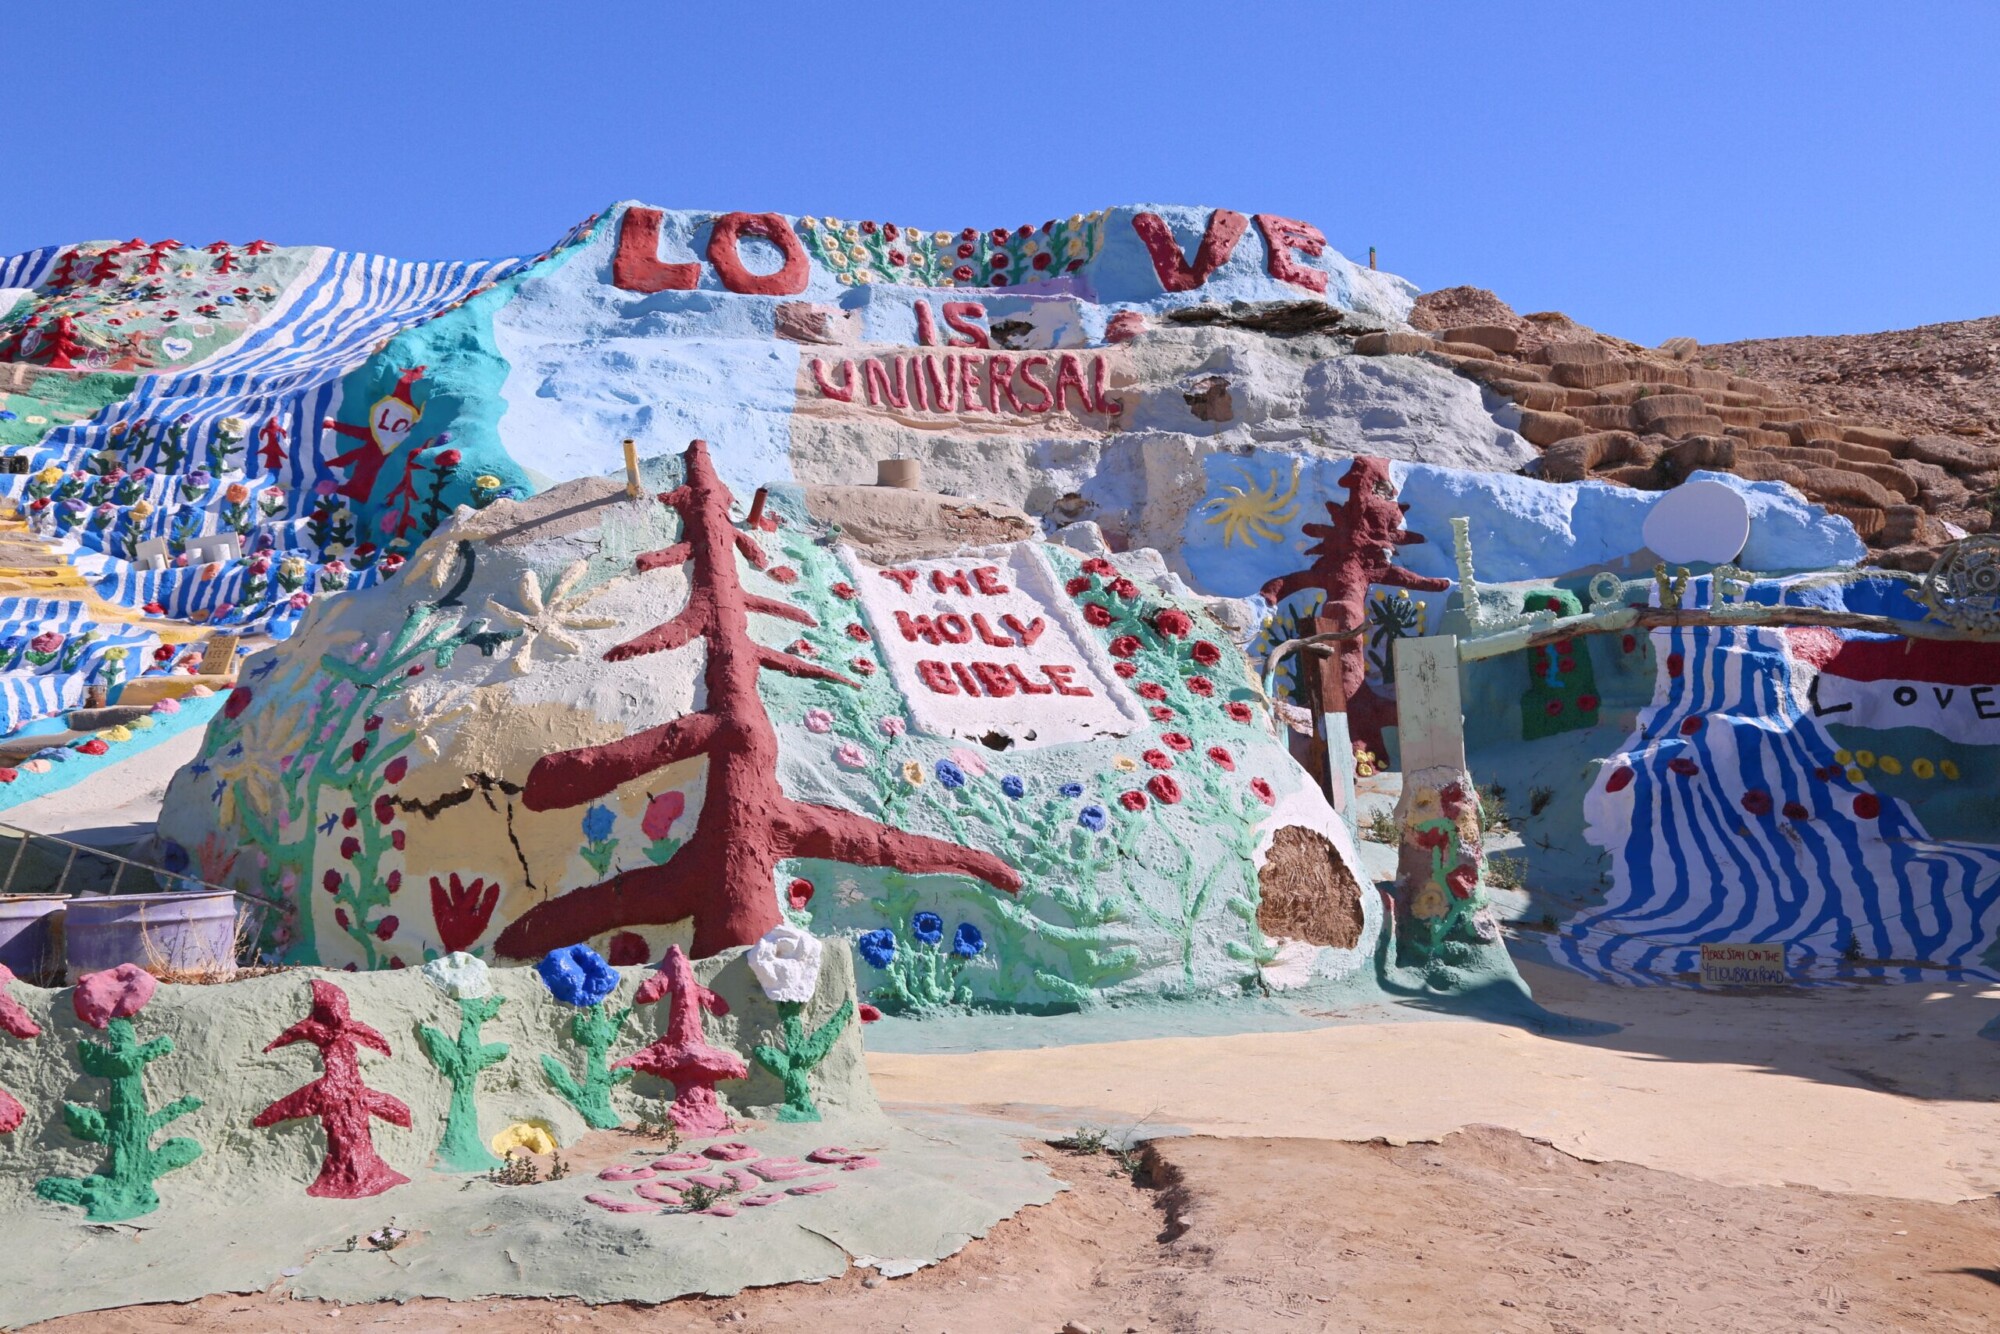 Salvation Mountain hand assembled and painted outsider art in Southern California.